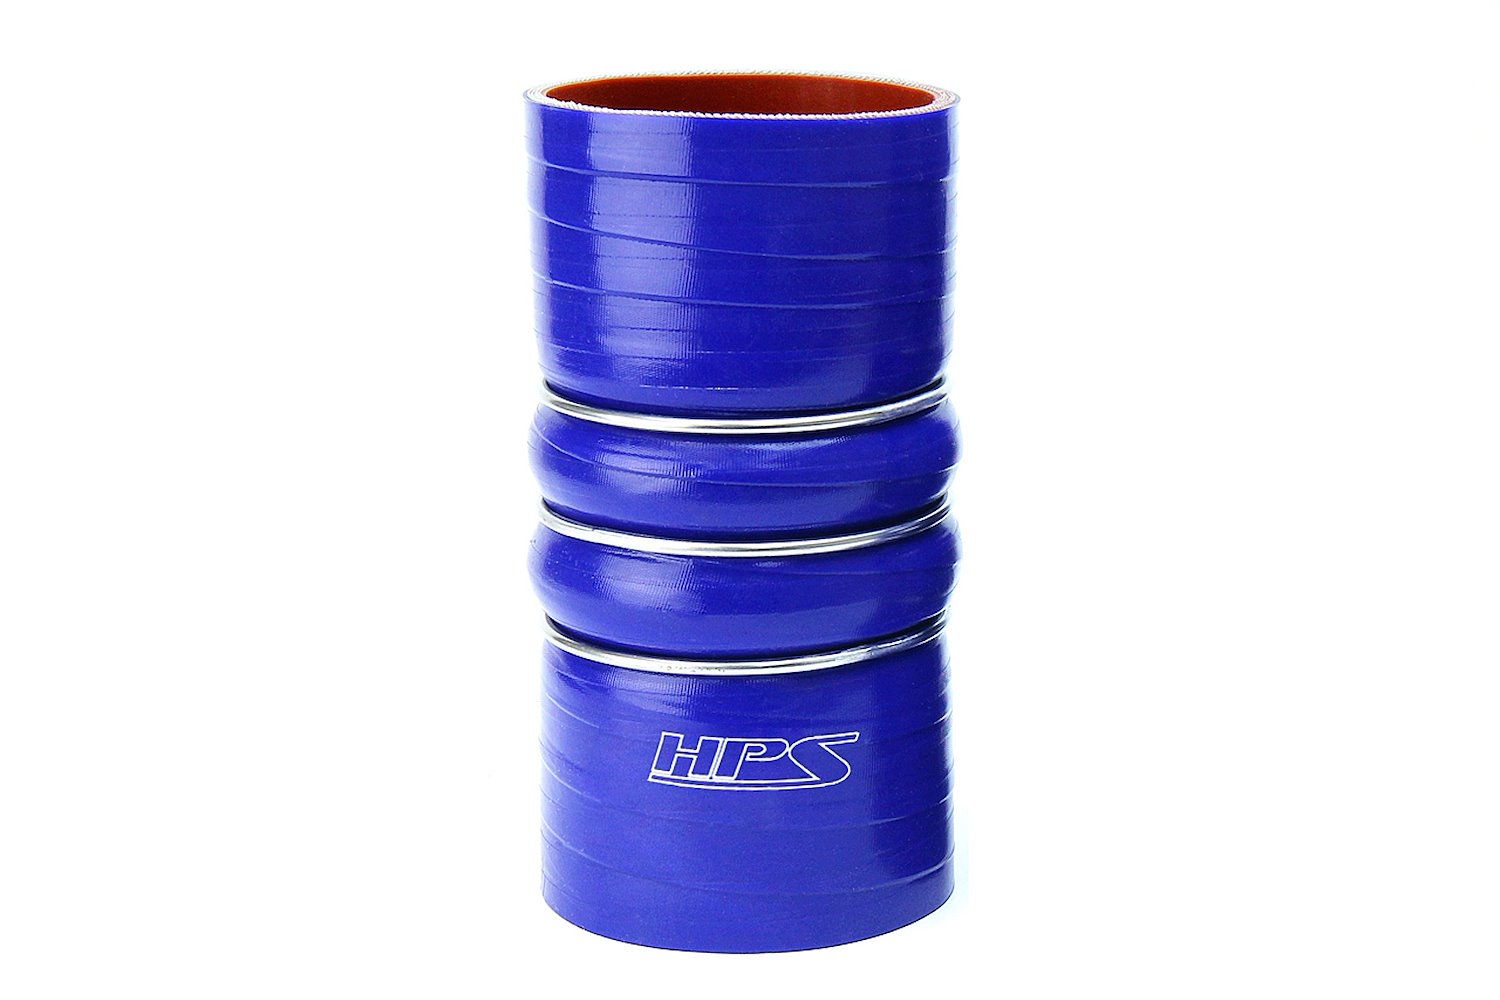 CAC-350-COLD Silicone CAC Hose, Silicone CAC Hump Coupler Hose, High-Temp 4-Ply Reinforced, 3-1/2 in. ID, 6 in. Long